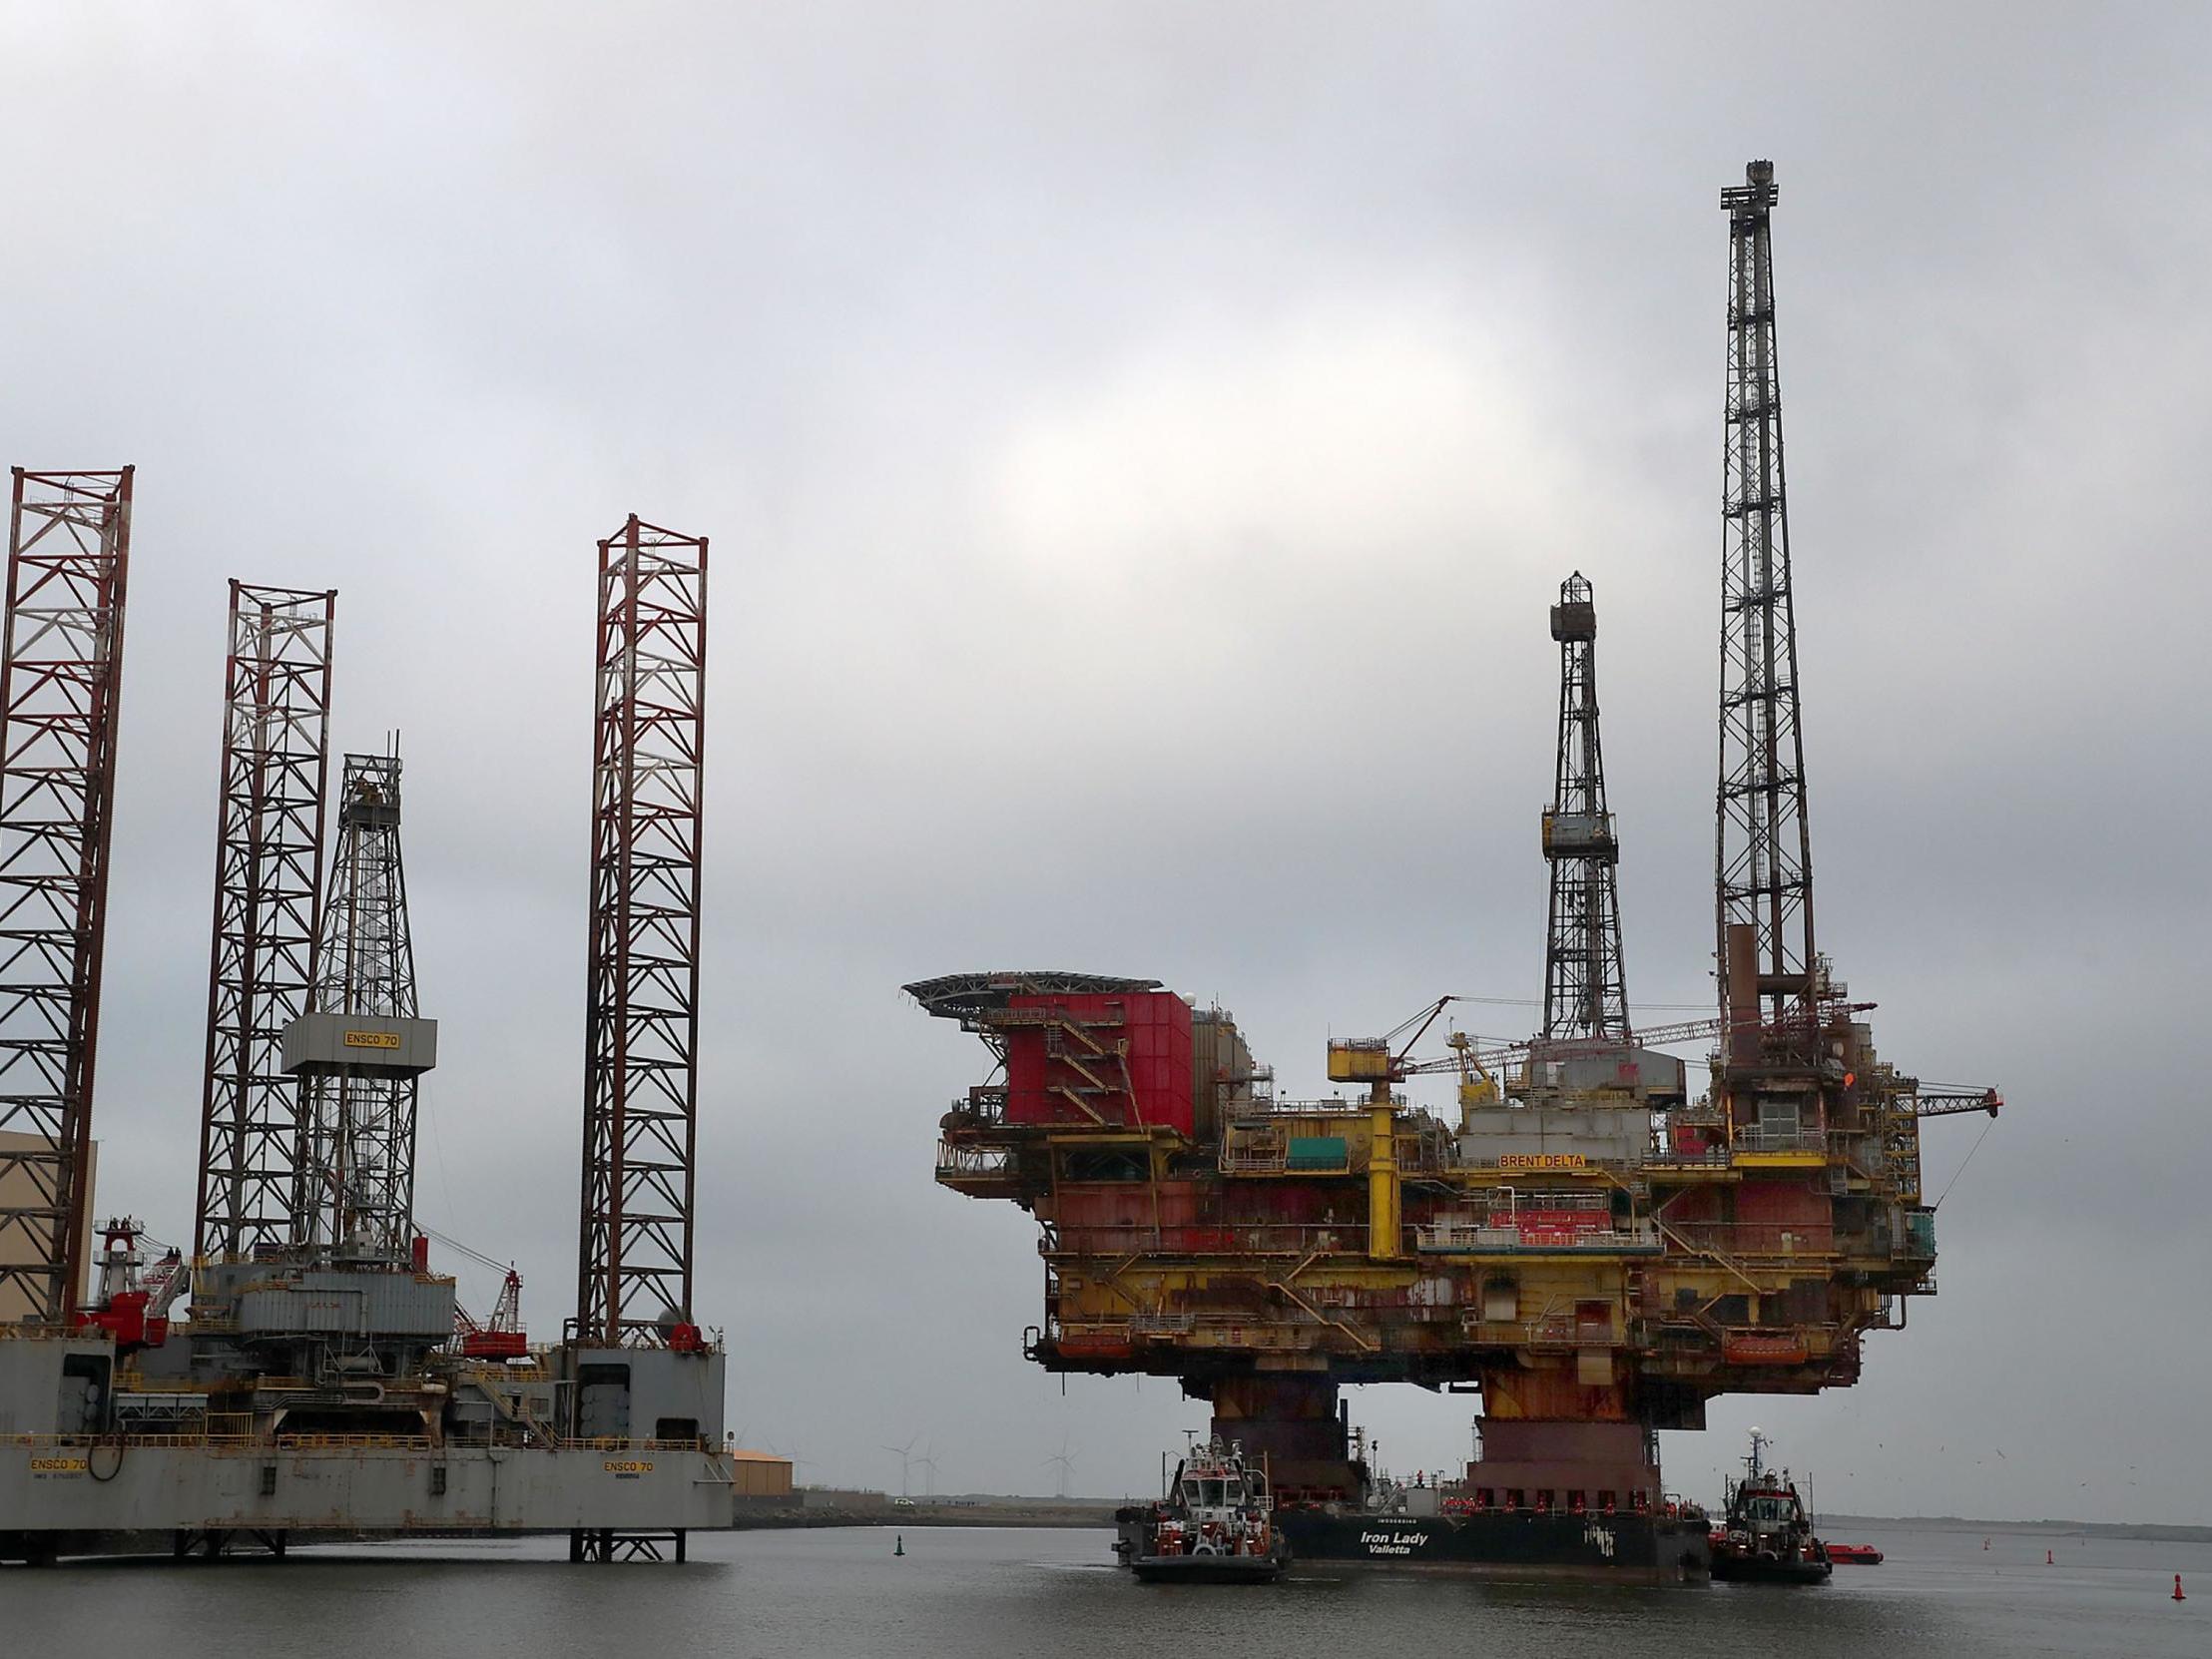 Shell's Brent Delta Topside offshore oil drilling rig platform is towed by tug boats up the River Tees to Able Seaton Port for decommissioning in England